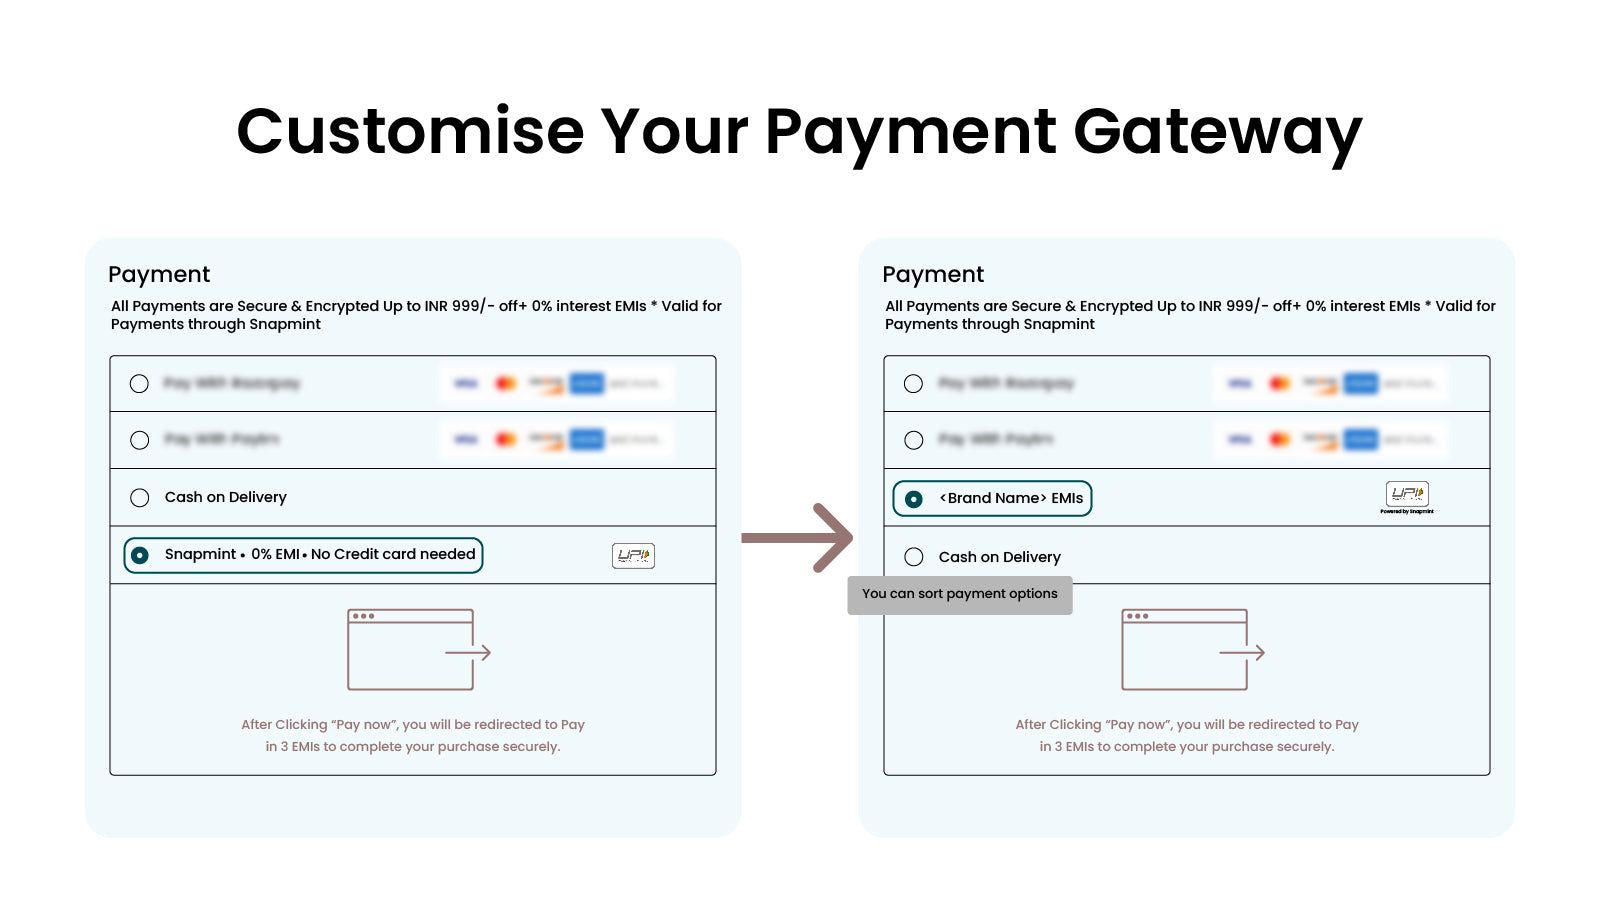 Sort your payment options